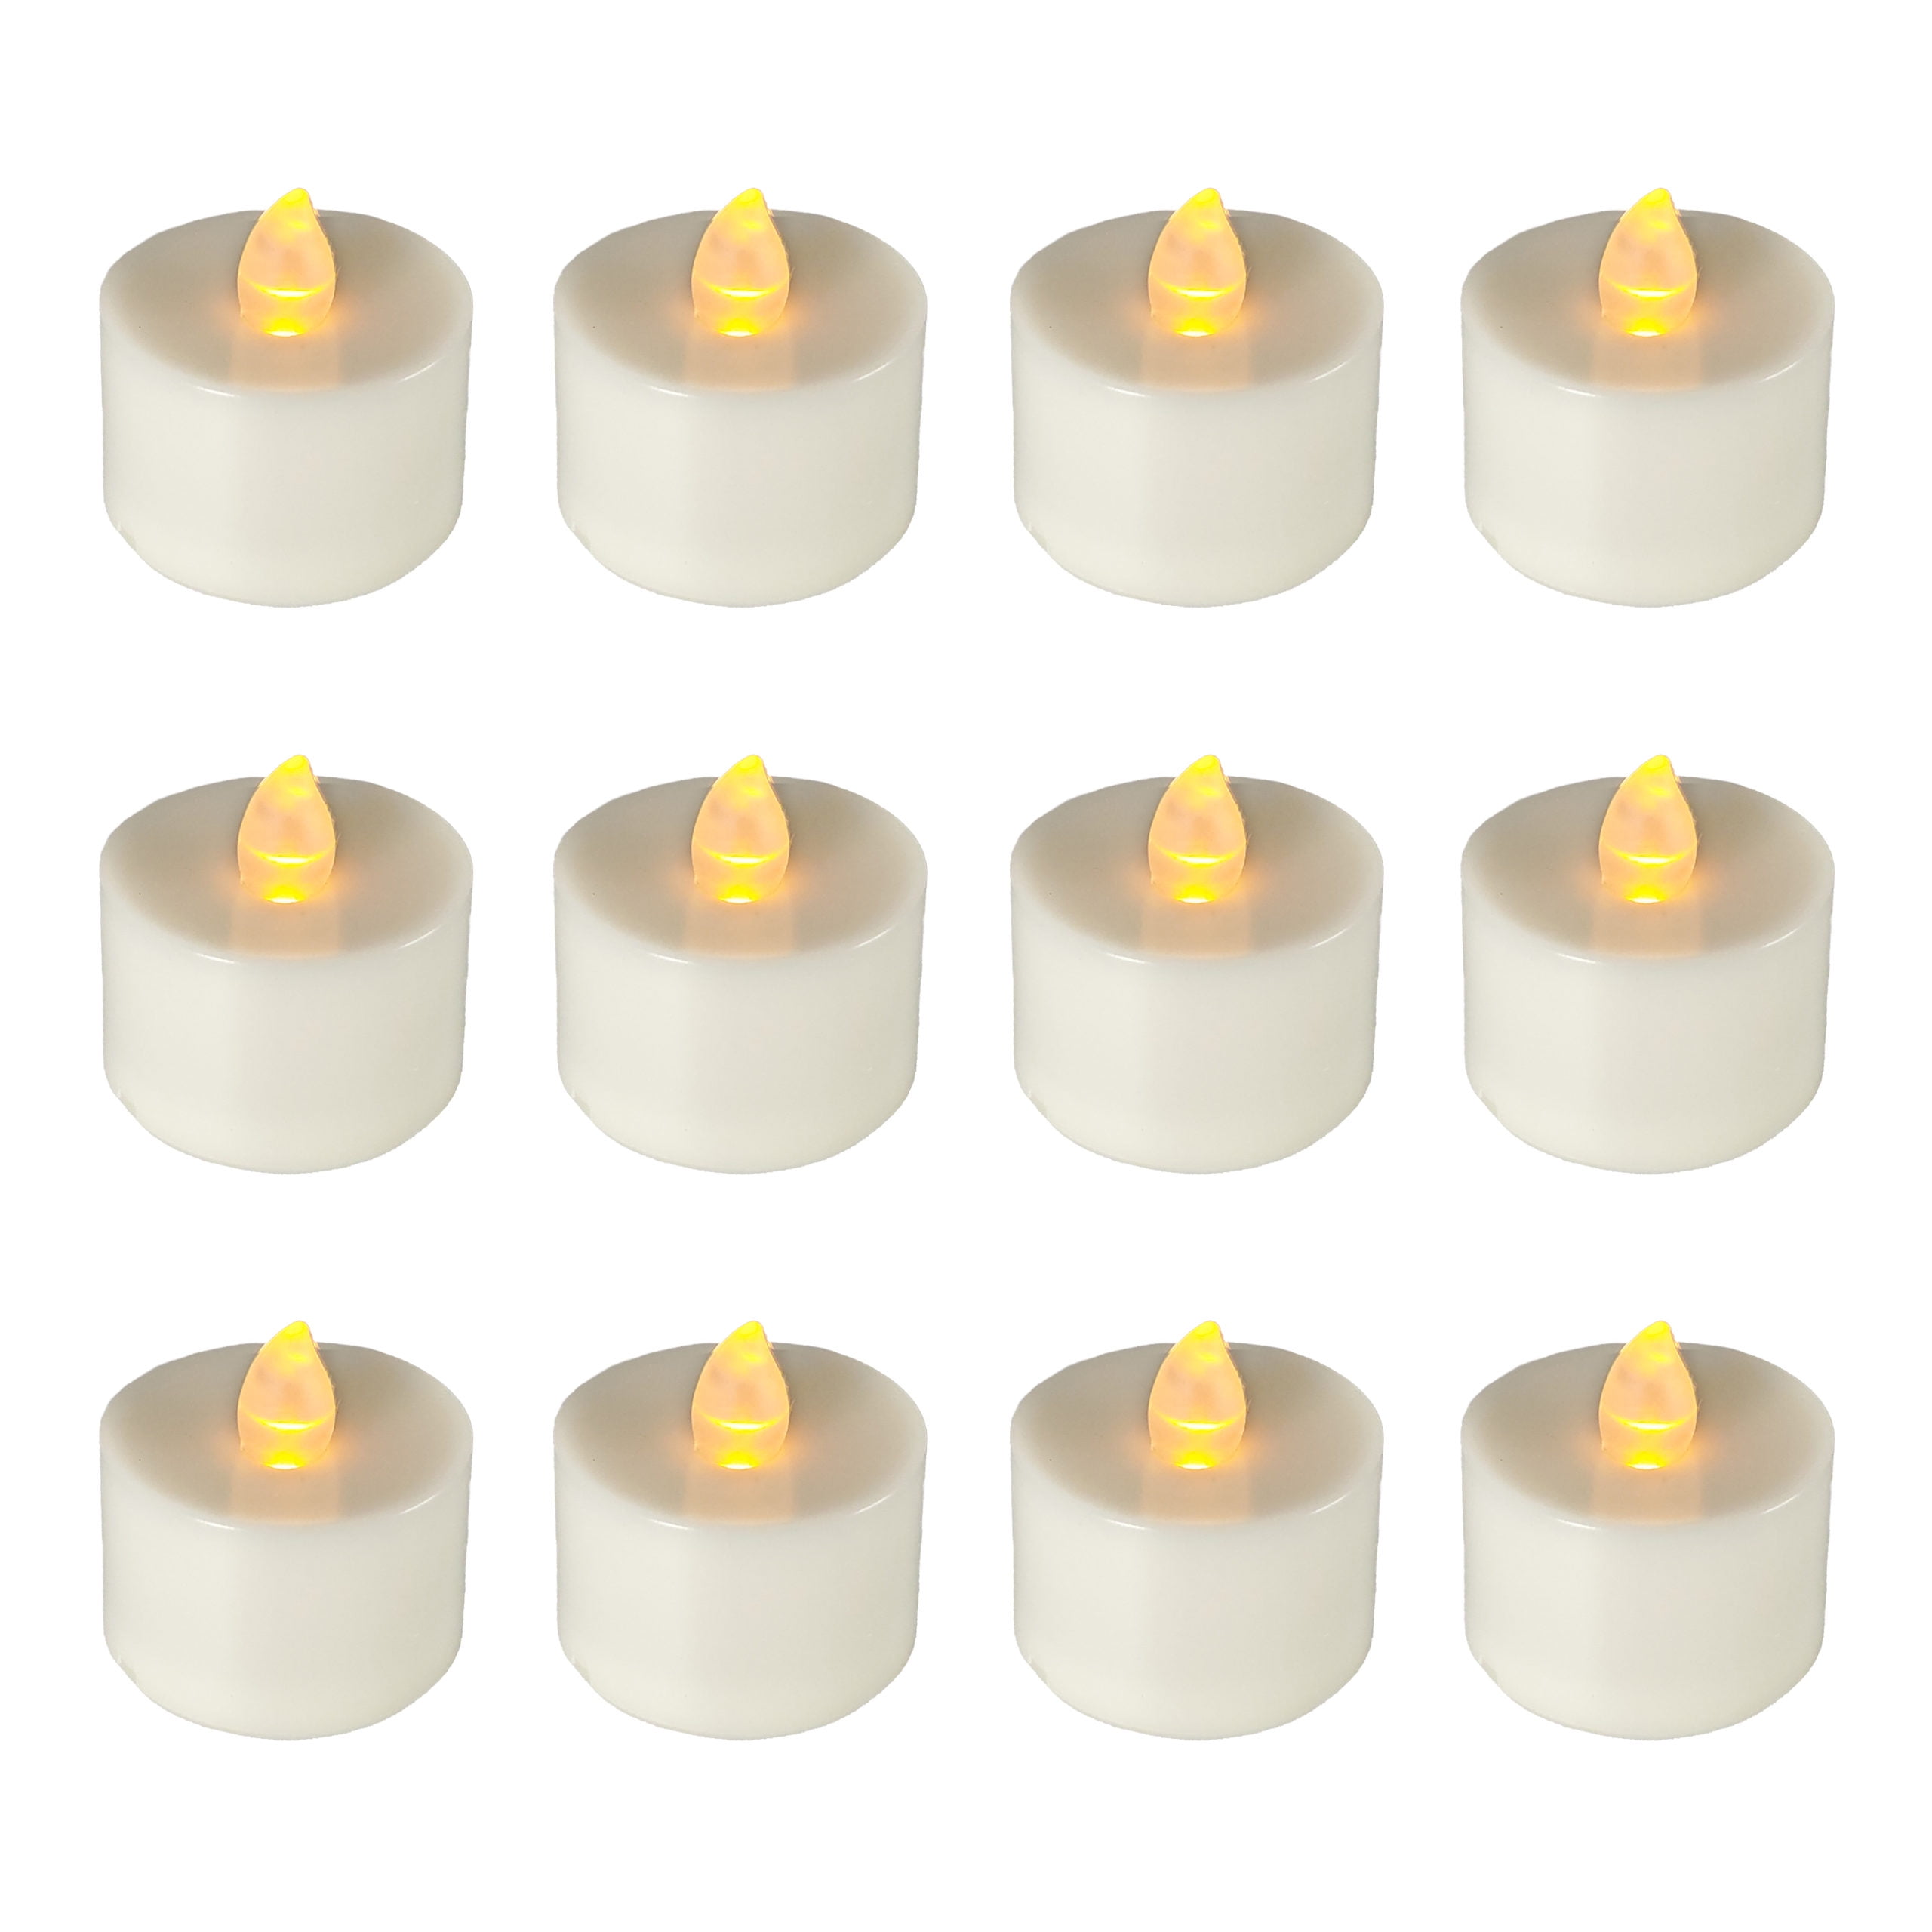 30 Candles Anti-Tobacco Candle Tea Lights 10 Pack x 3 Prices Candles 